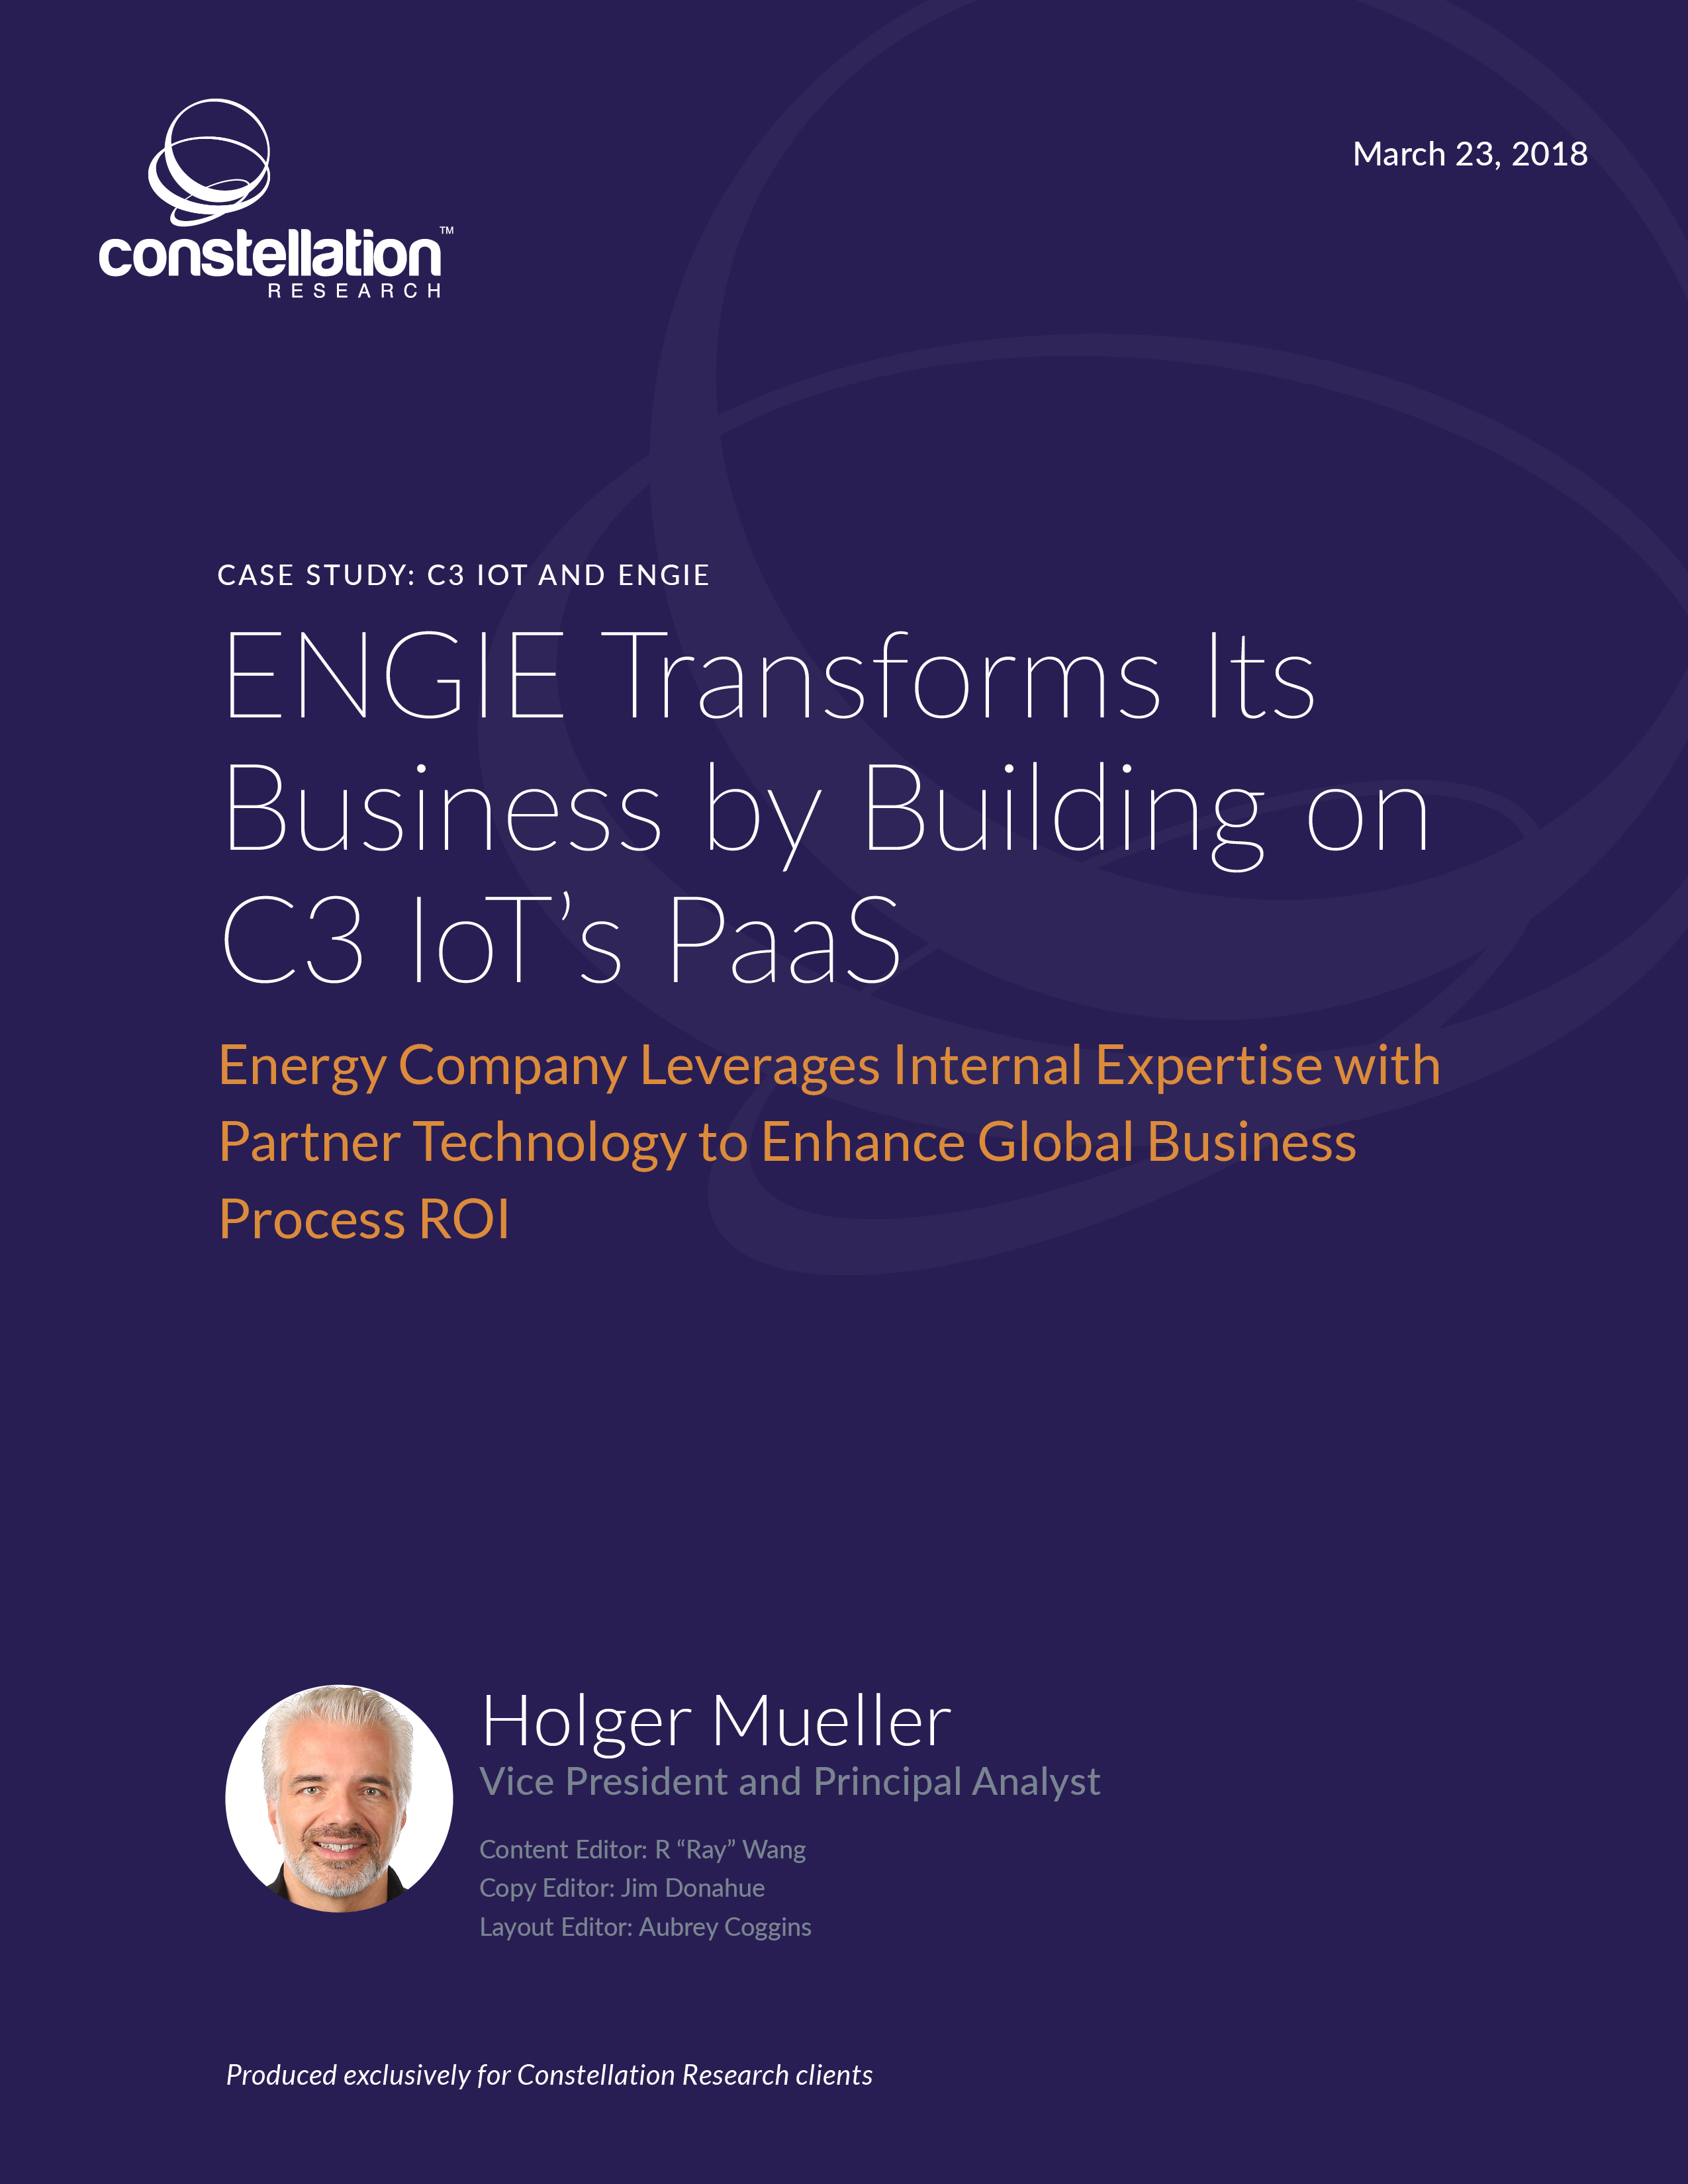 C3 IoT and ENGIE Case Study